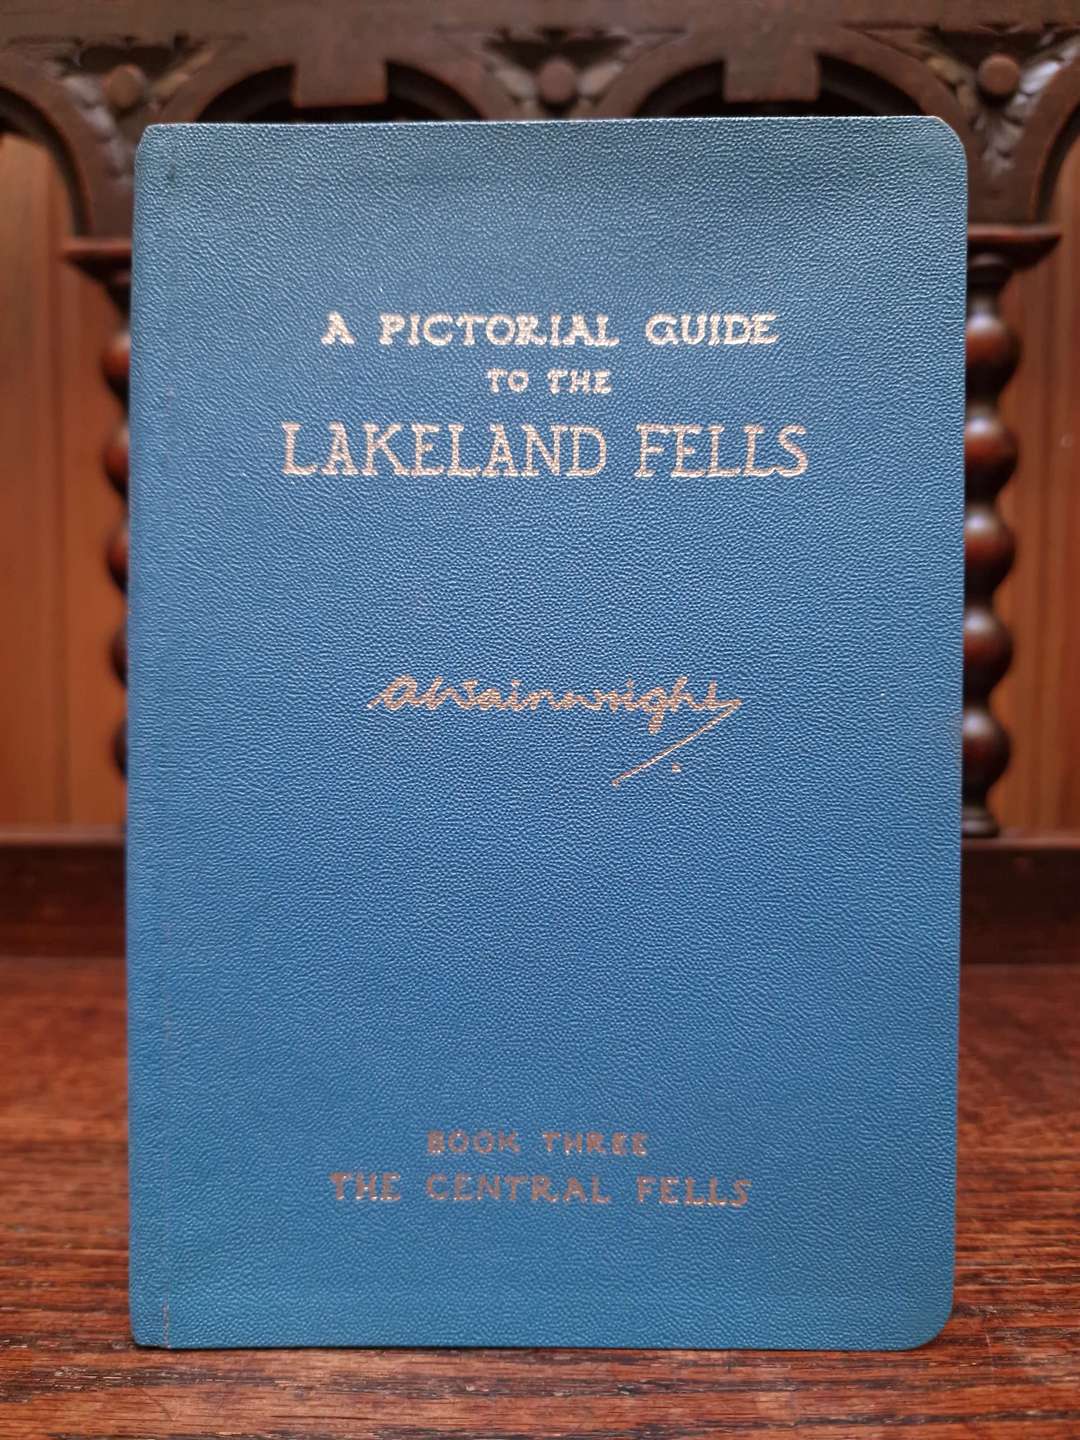 The Central Fells First Edition